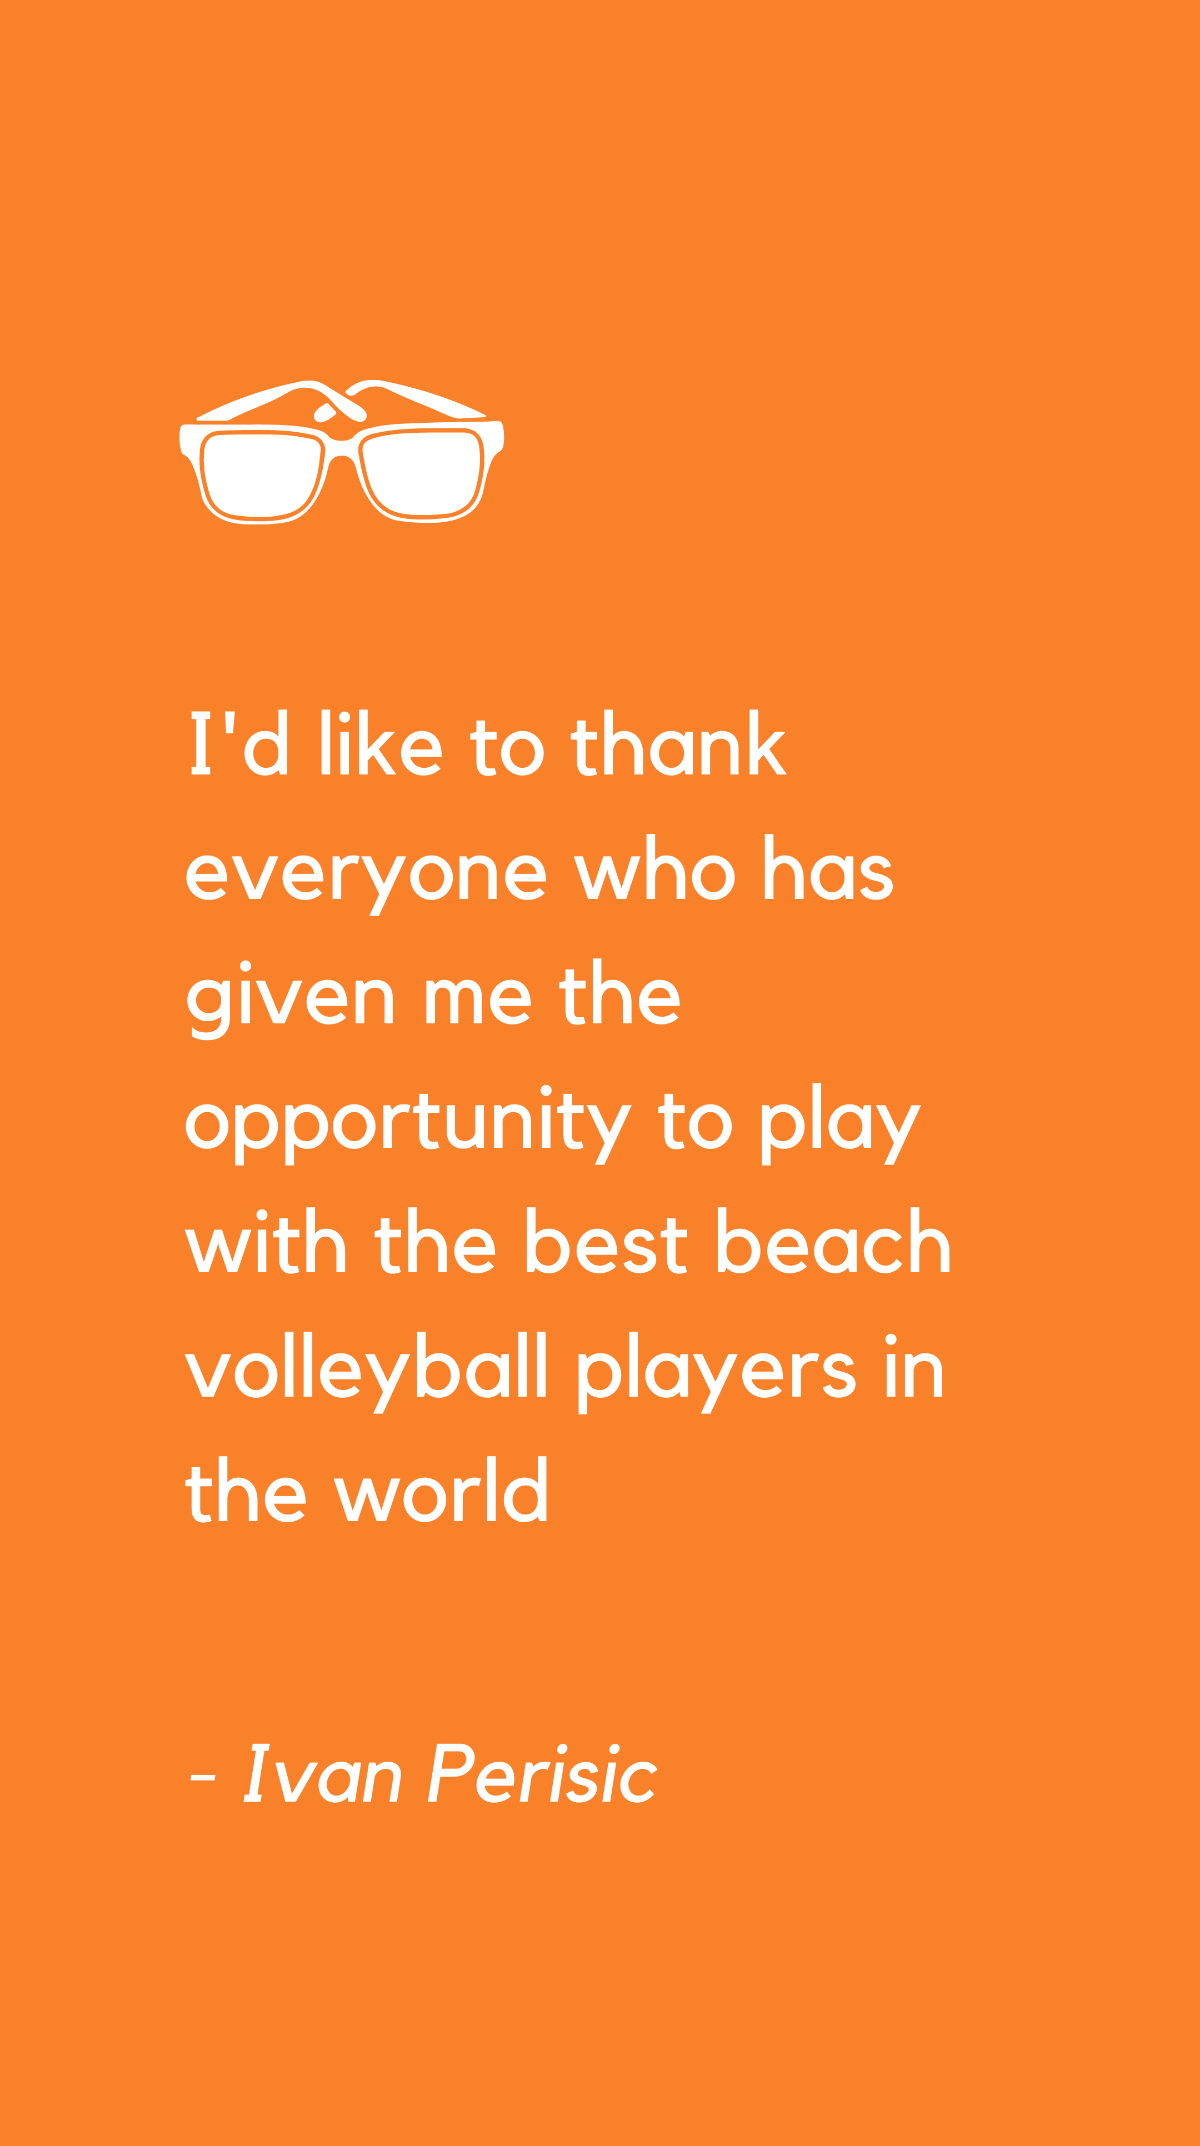 Free Ivan Perisic - I'd like to thank everyone who has given me the opportunity to play with the best beach volleyball players in the world Template